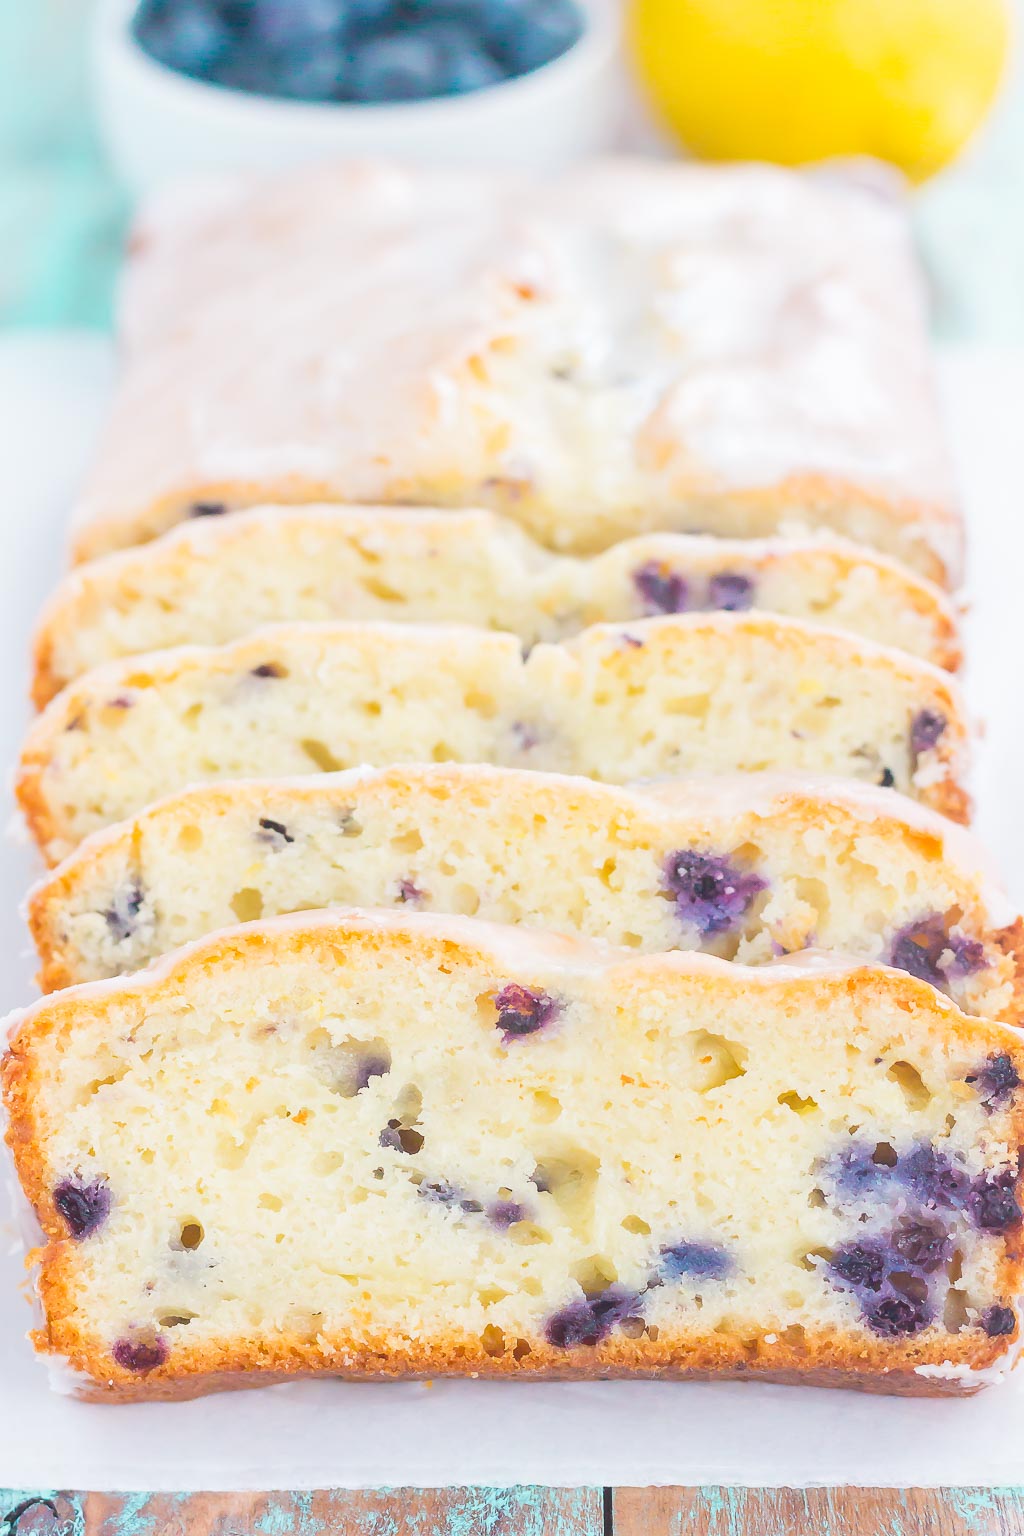 This Lemon Blueberry Bread is perfectly sweet, moist, and simple to make. An easy lemon glaze adds a touch of sweetness that makes this bread perfect for breakfast or dessert! #bread #lemonbread #blueberrybread #lemonblueberrybread #quickbread #dessert 